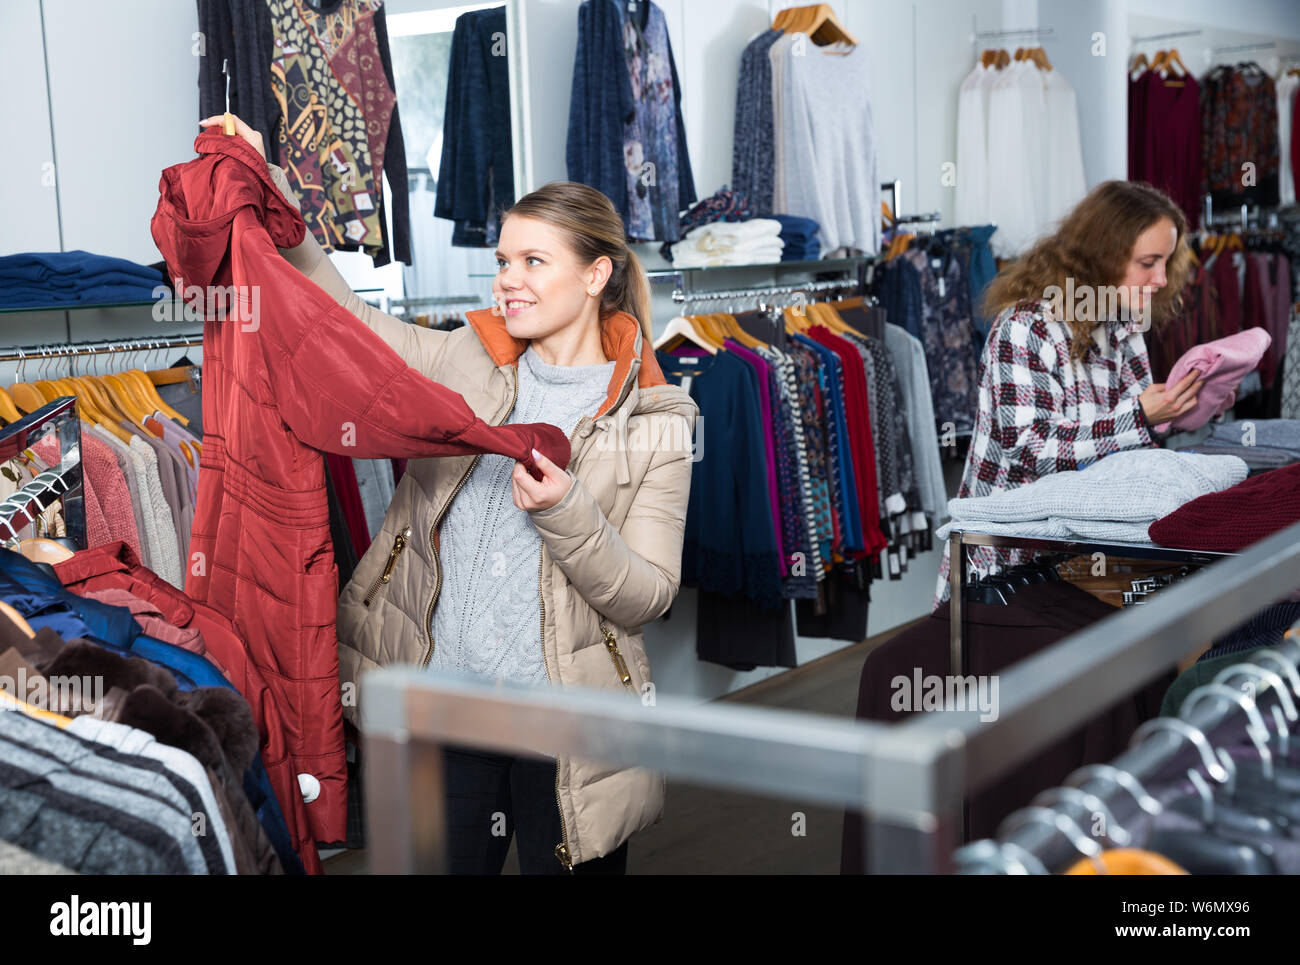 Shopping room of clothing shop with women choosing overcoats and cardigans Stock Photo